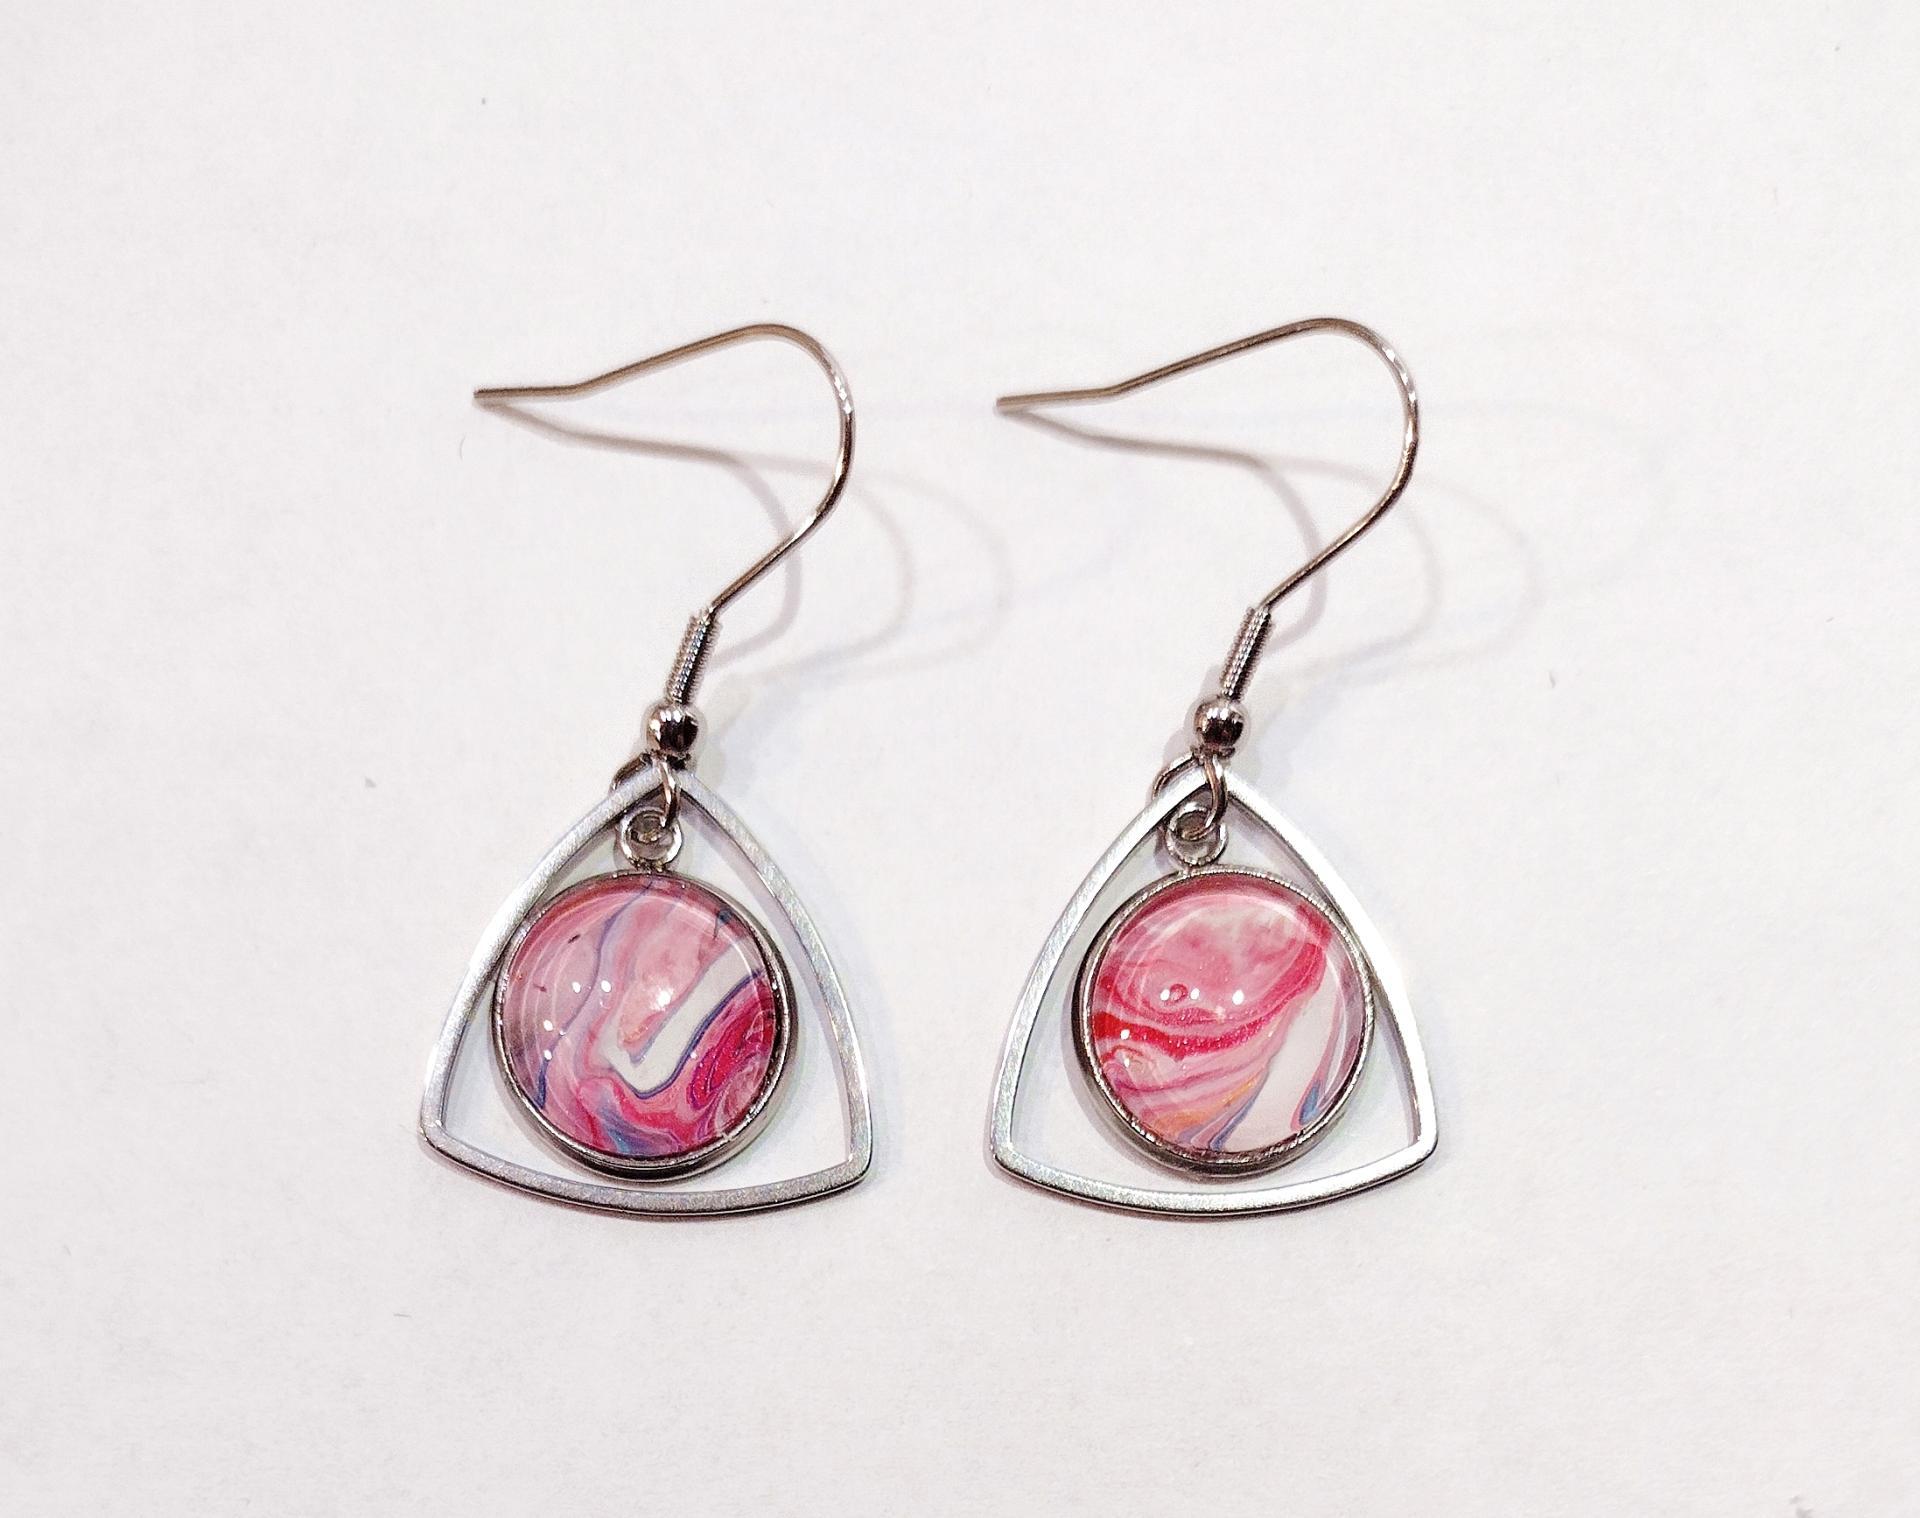 Painted Earrings, Pink and White Swirl Triangles